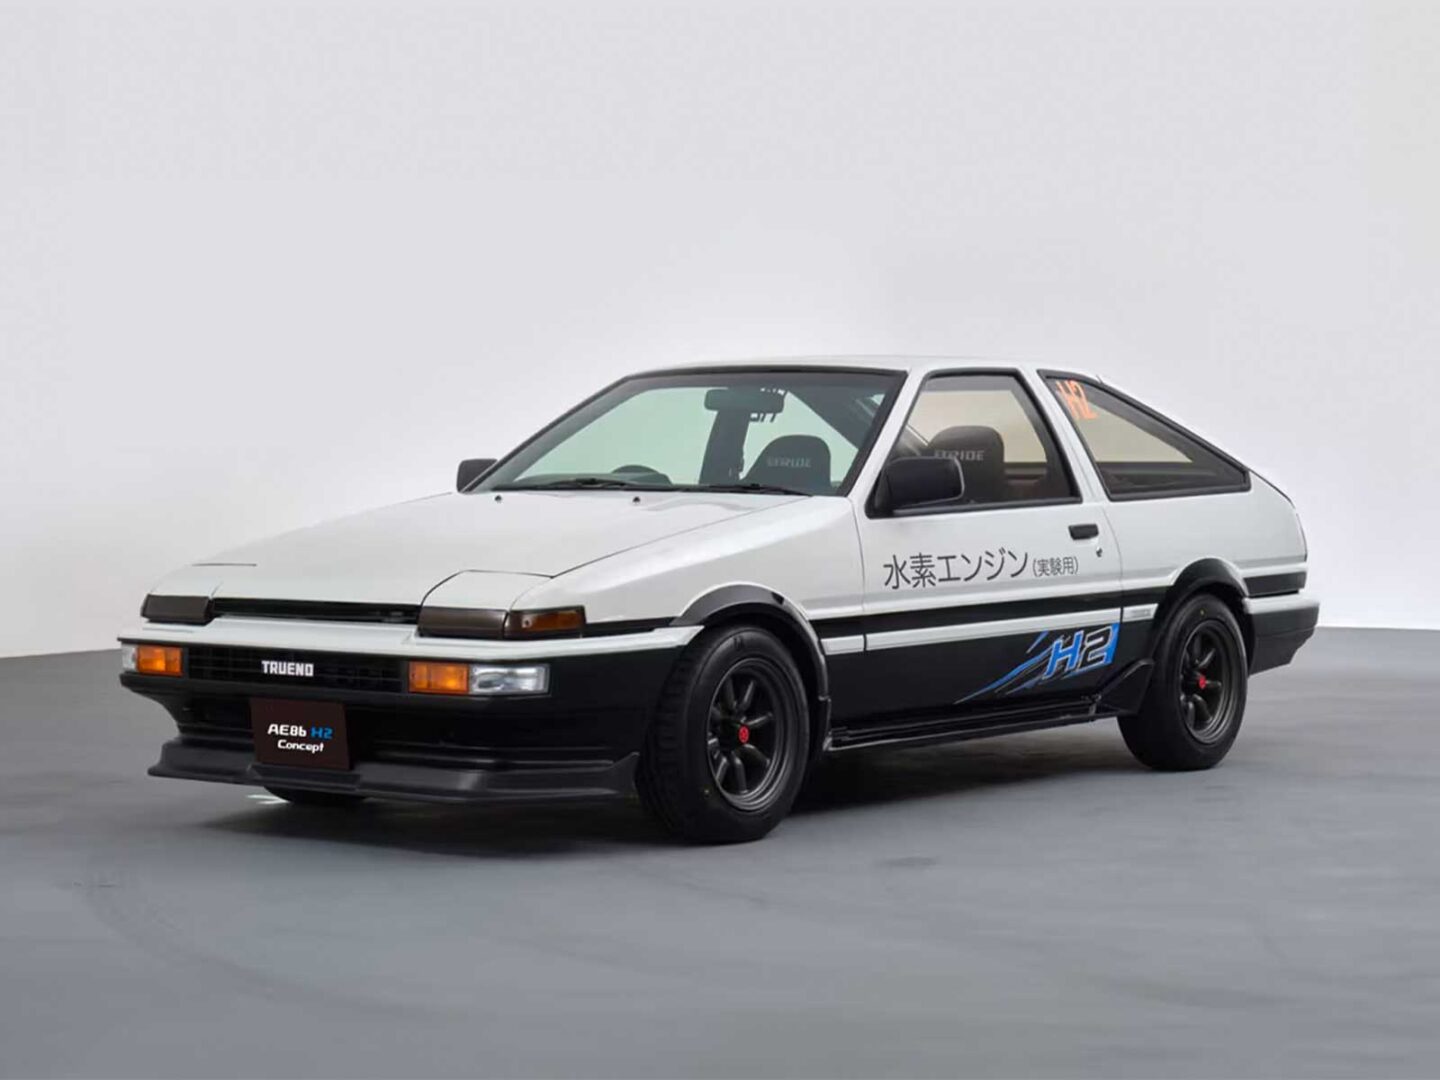 The iconic Toyota AE86 returns in electric or hydrogen format